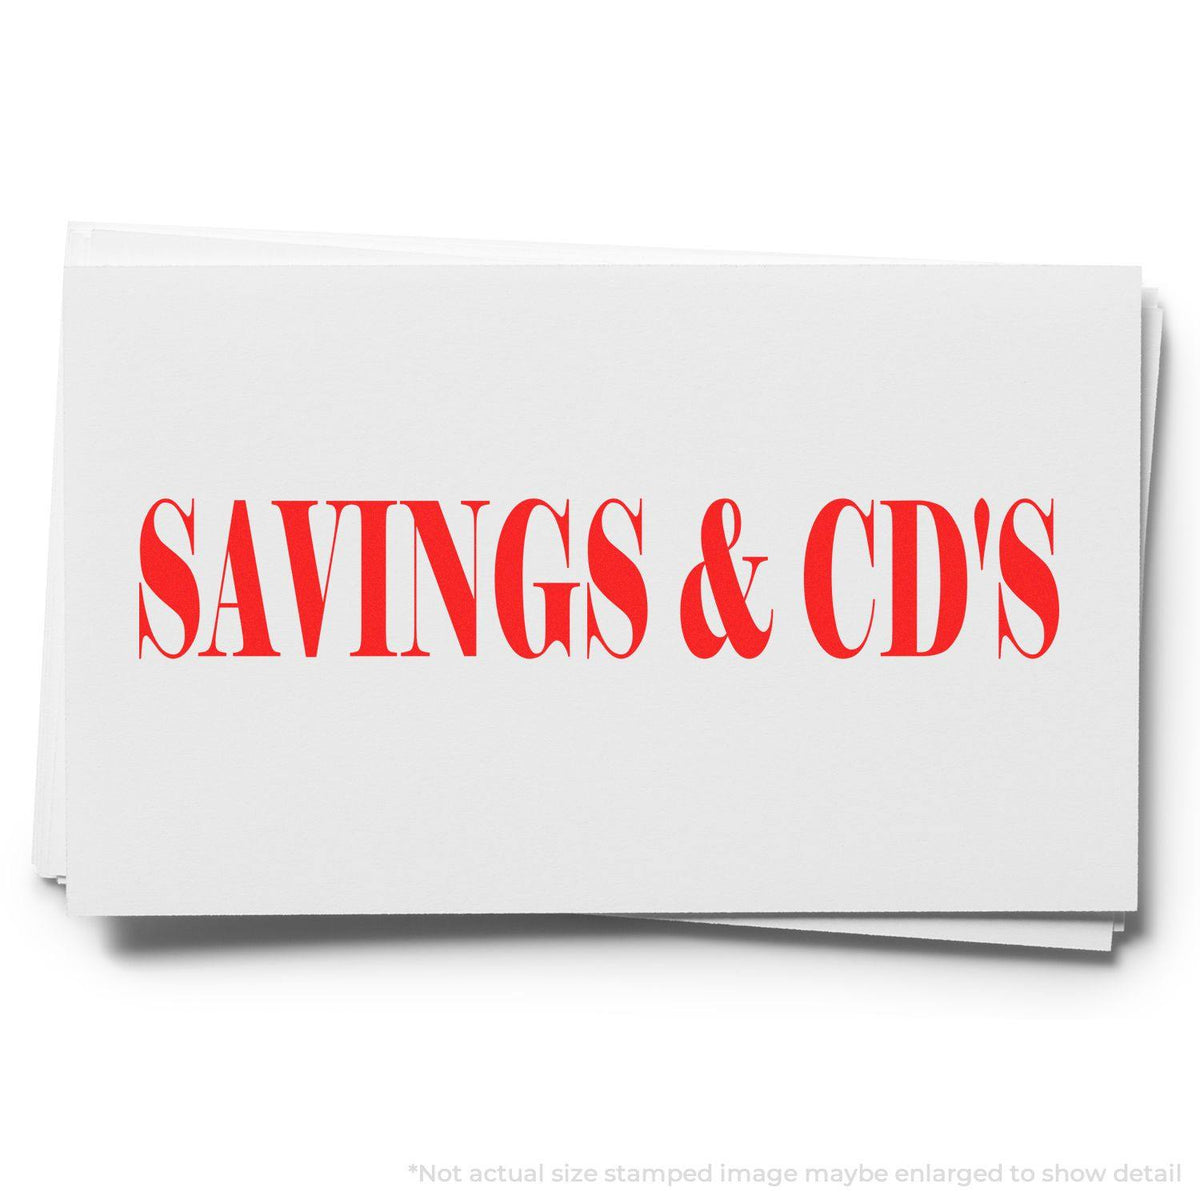 Large Savings Cds Rubber Stamp Lifestyle Photo